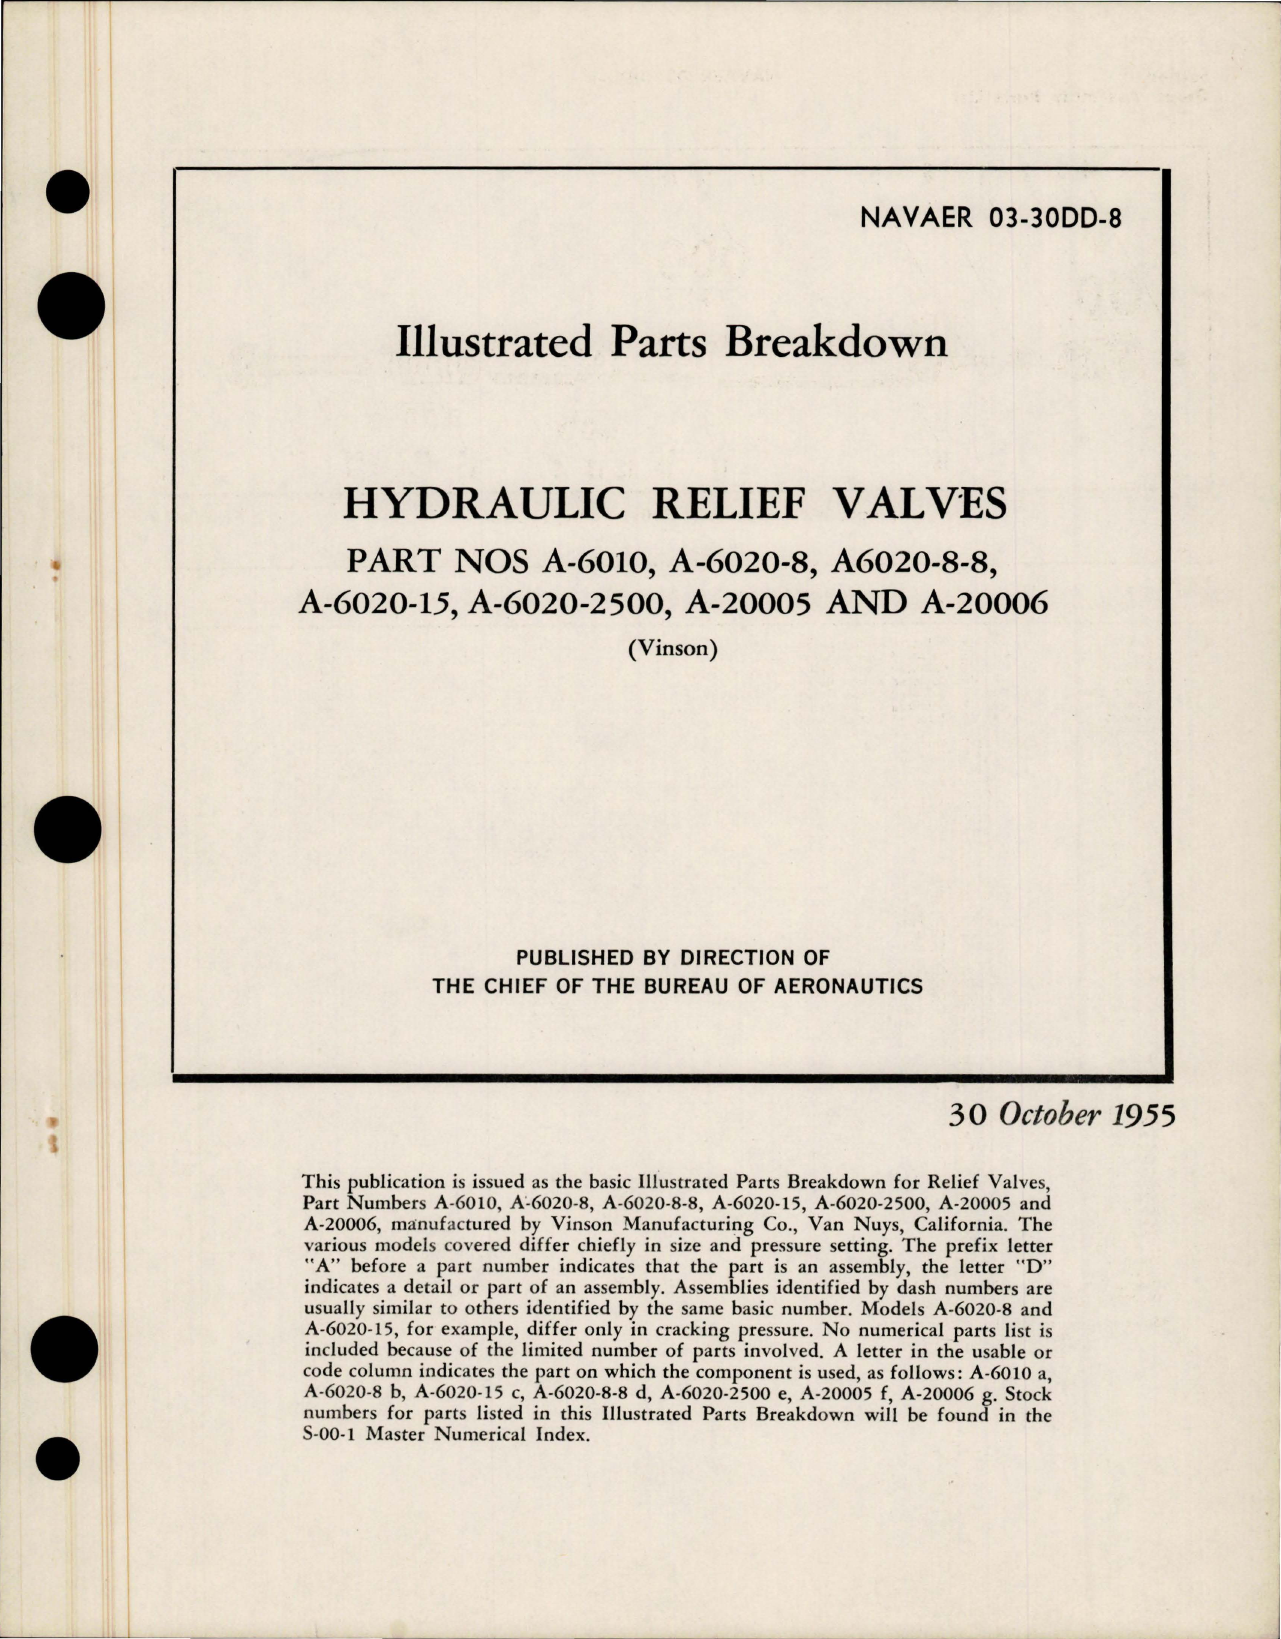 Sample page 1 from AirCorps Library document: Illustrated Parts Breakdown for Hydraulic Relief Valves